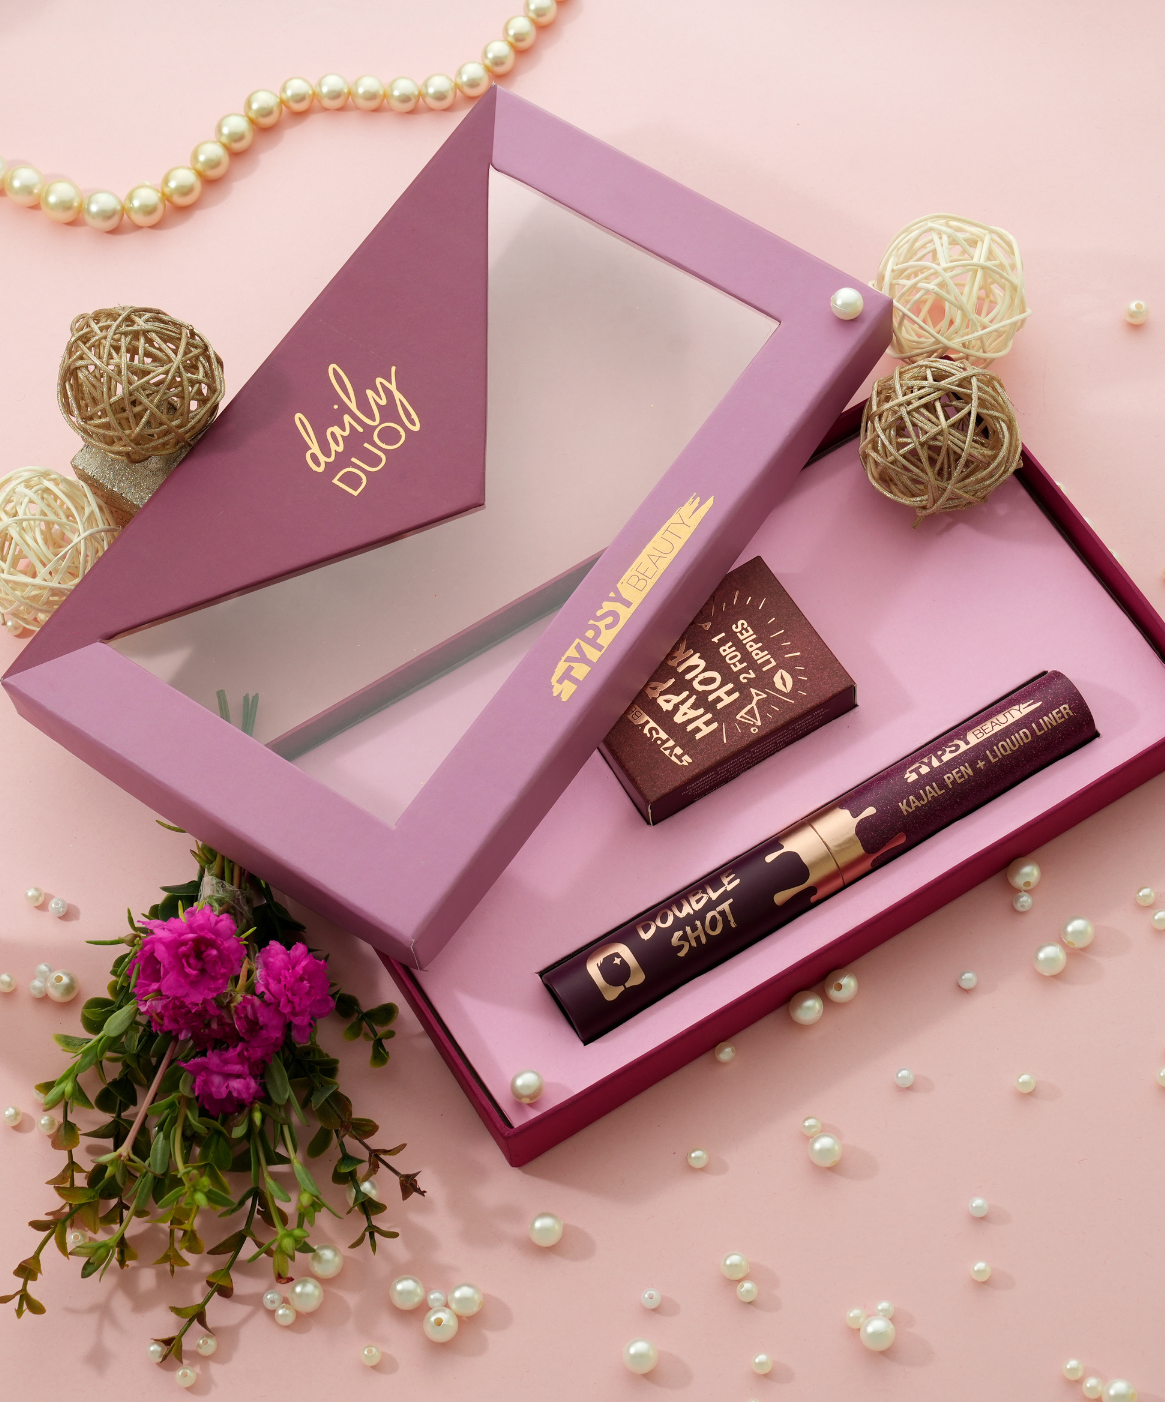 Daily Duo Gift Set - Typsy Beauty